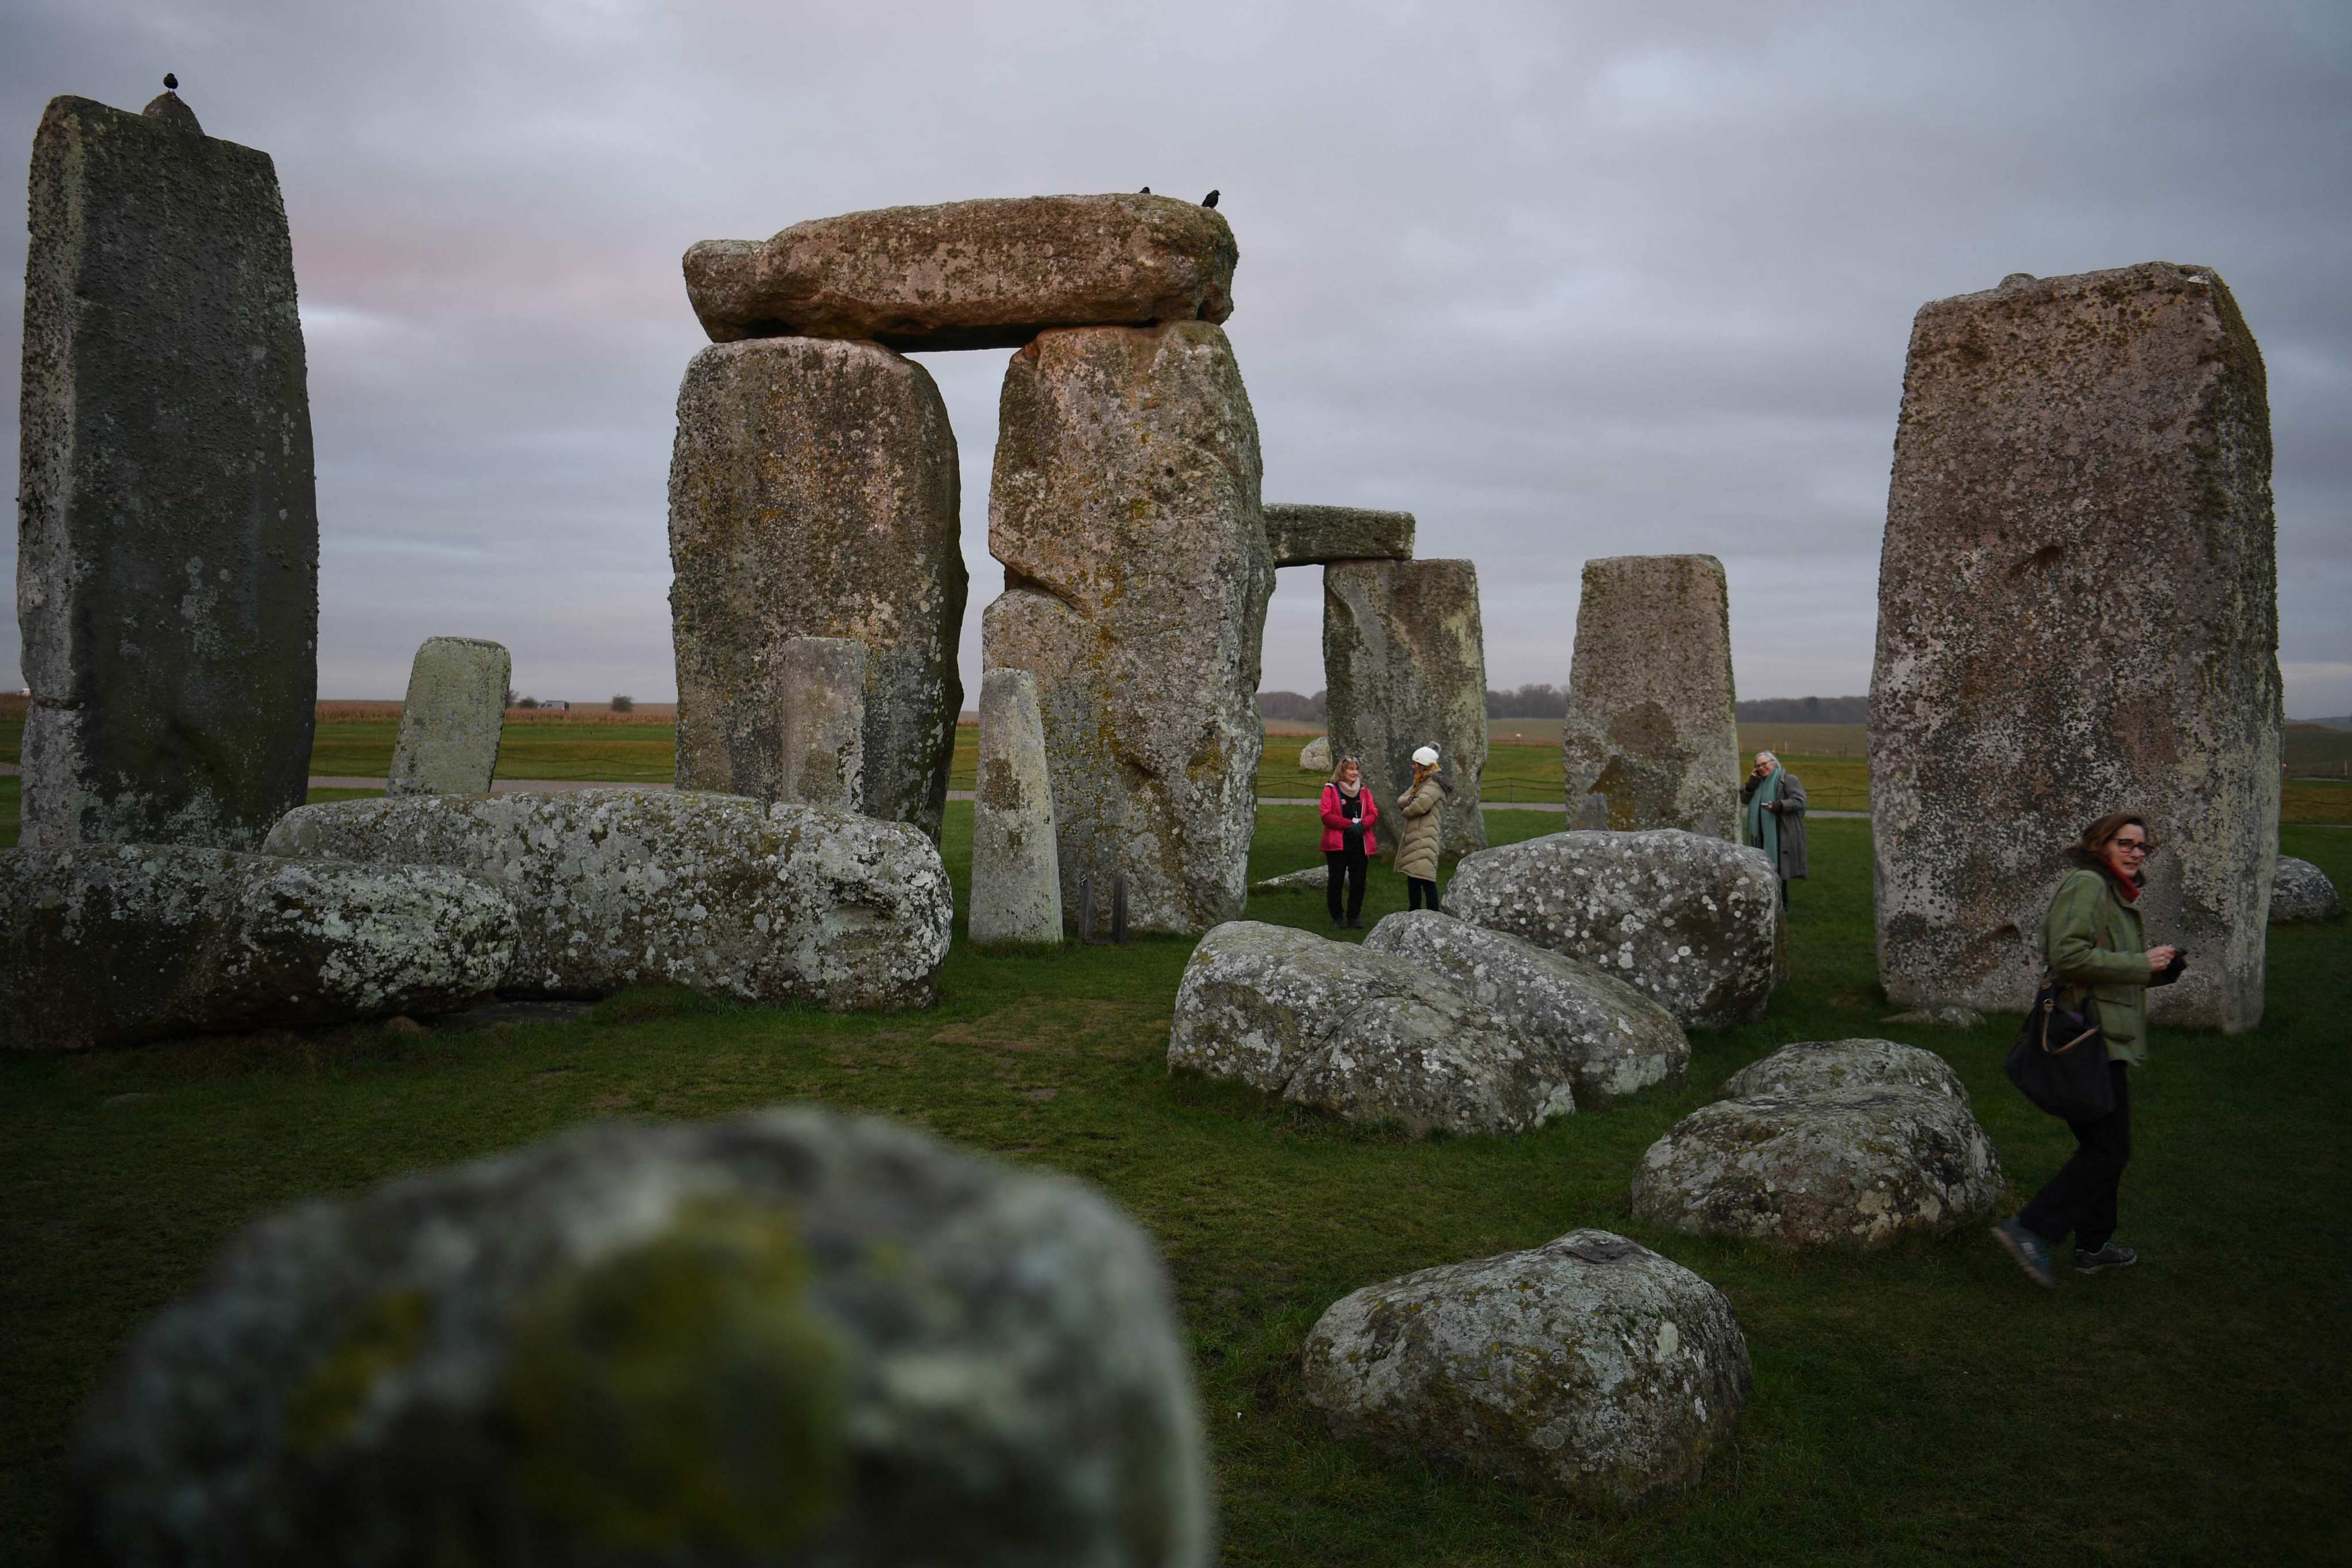 People visit the prehistoric monument Stonehenge near Amesbury in southern England on January 19, 2022. - As the sun rose over the frost on Salisbury Plain, Sarah Greaney summoned the prehistoric ghosts of the hundreds of workers who built Stonehenge. “These people are farmers, they have crops, they have animals and the turning of the year would have been a major part of their lifestyles,” Greaney, senior properties historian at English Heritage, told AFP. It is 4,500 years since labourers from across Britain and the European mainland descended on the vast plain in southwest England, hoisting the huge stones to form the now world-famous landmark. (Photo by Daniel LEAL / AFP) / TO GO WITH AFP STORY BY Anna CUENCA